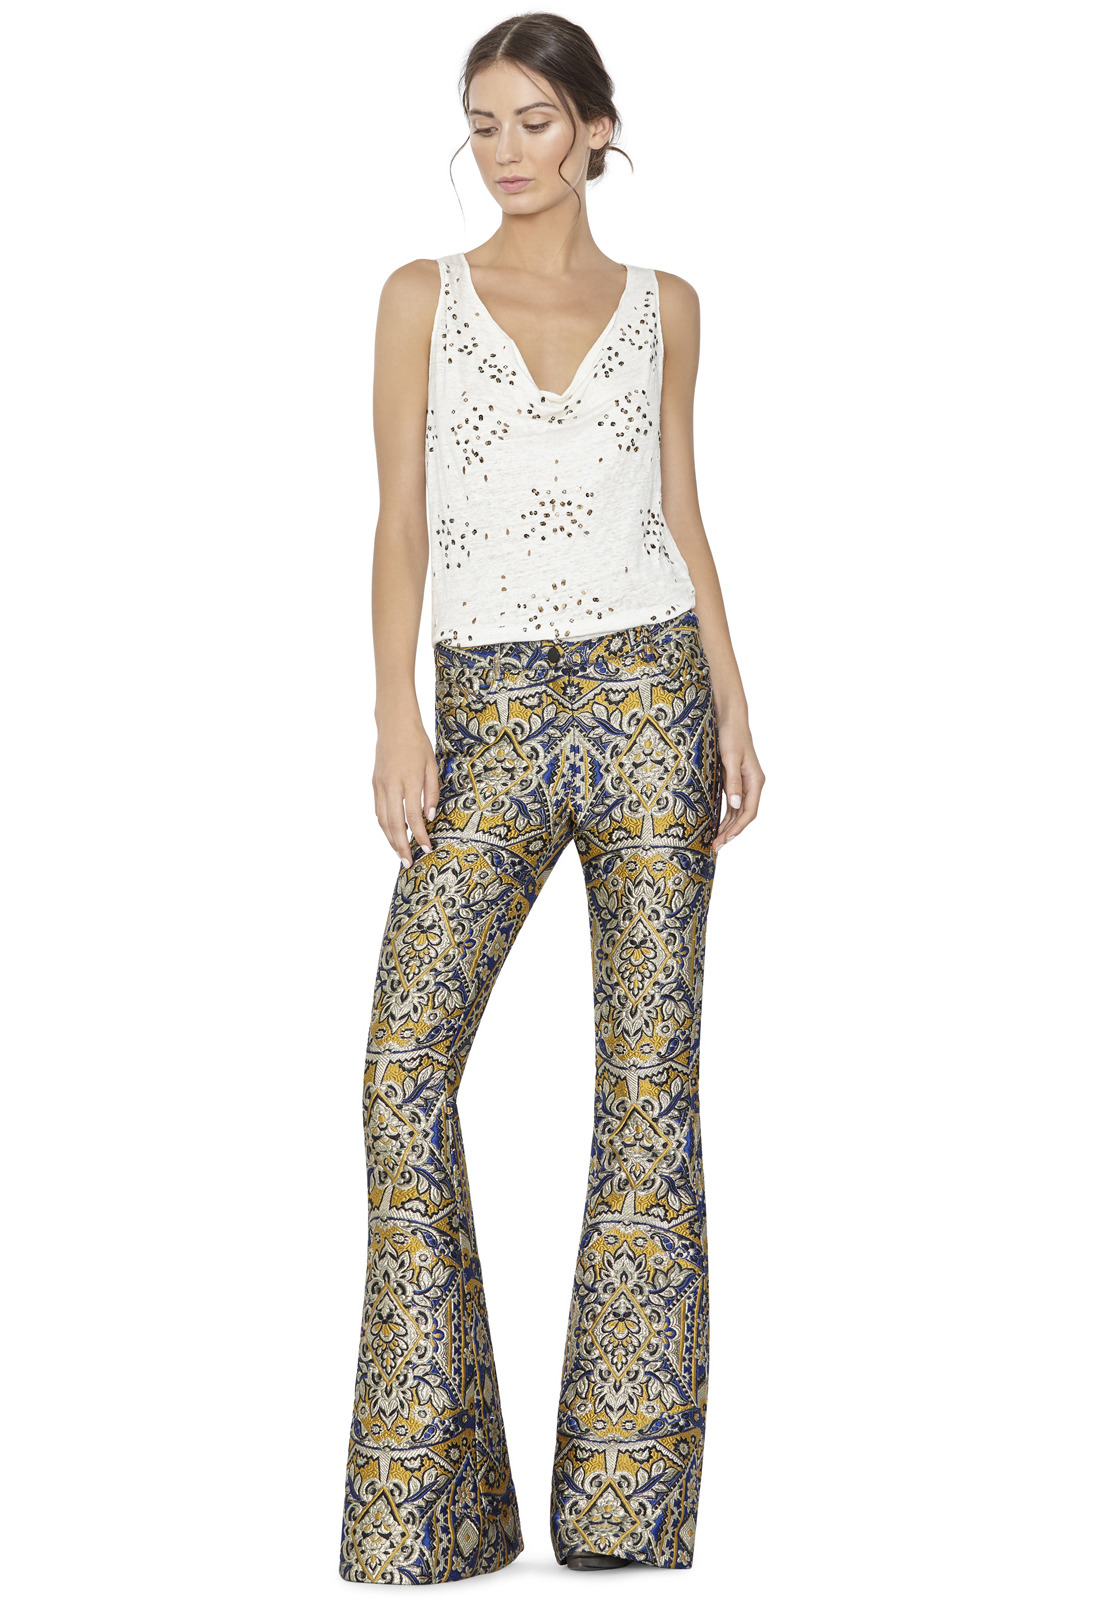 Lyst - Alice + Olivia Lucy Embellished Trapeze Top in Natural